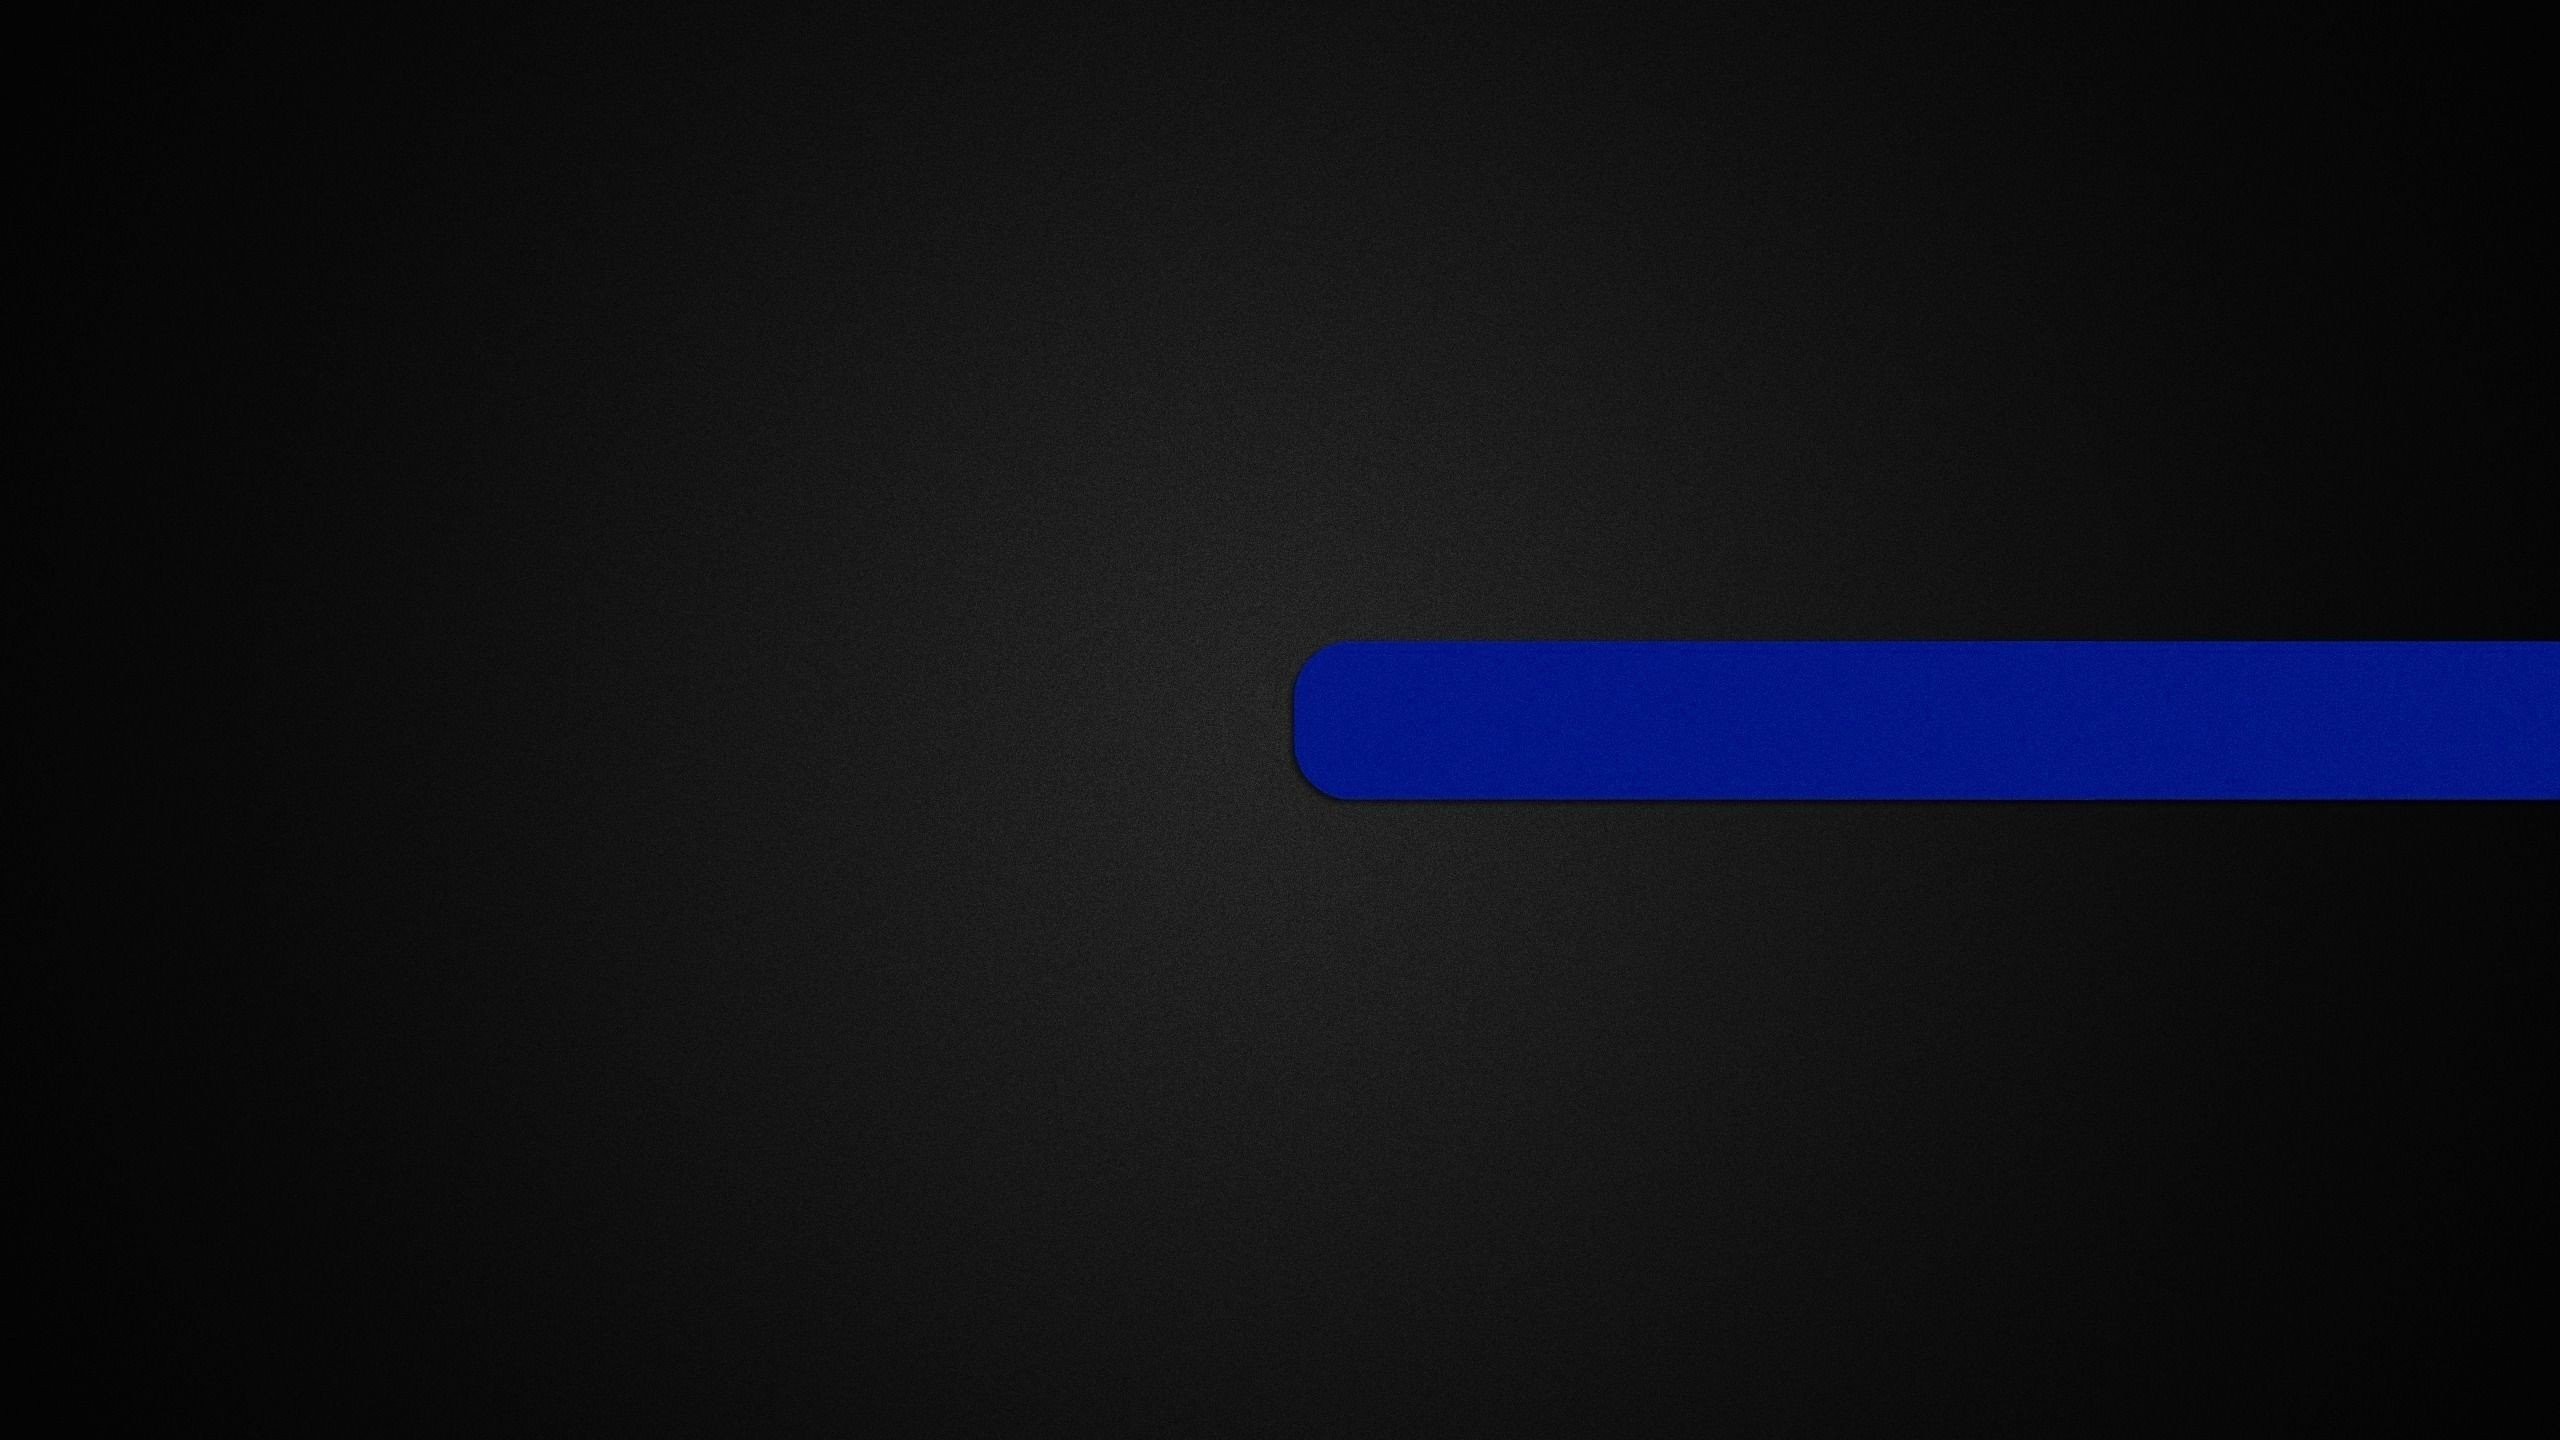 2560x1440 Background Black Blue Abstracts Images ...